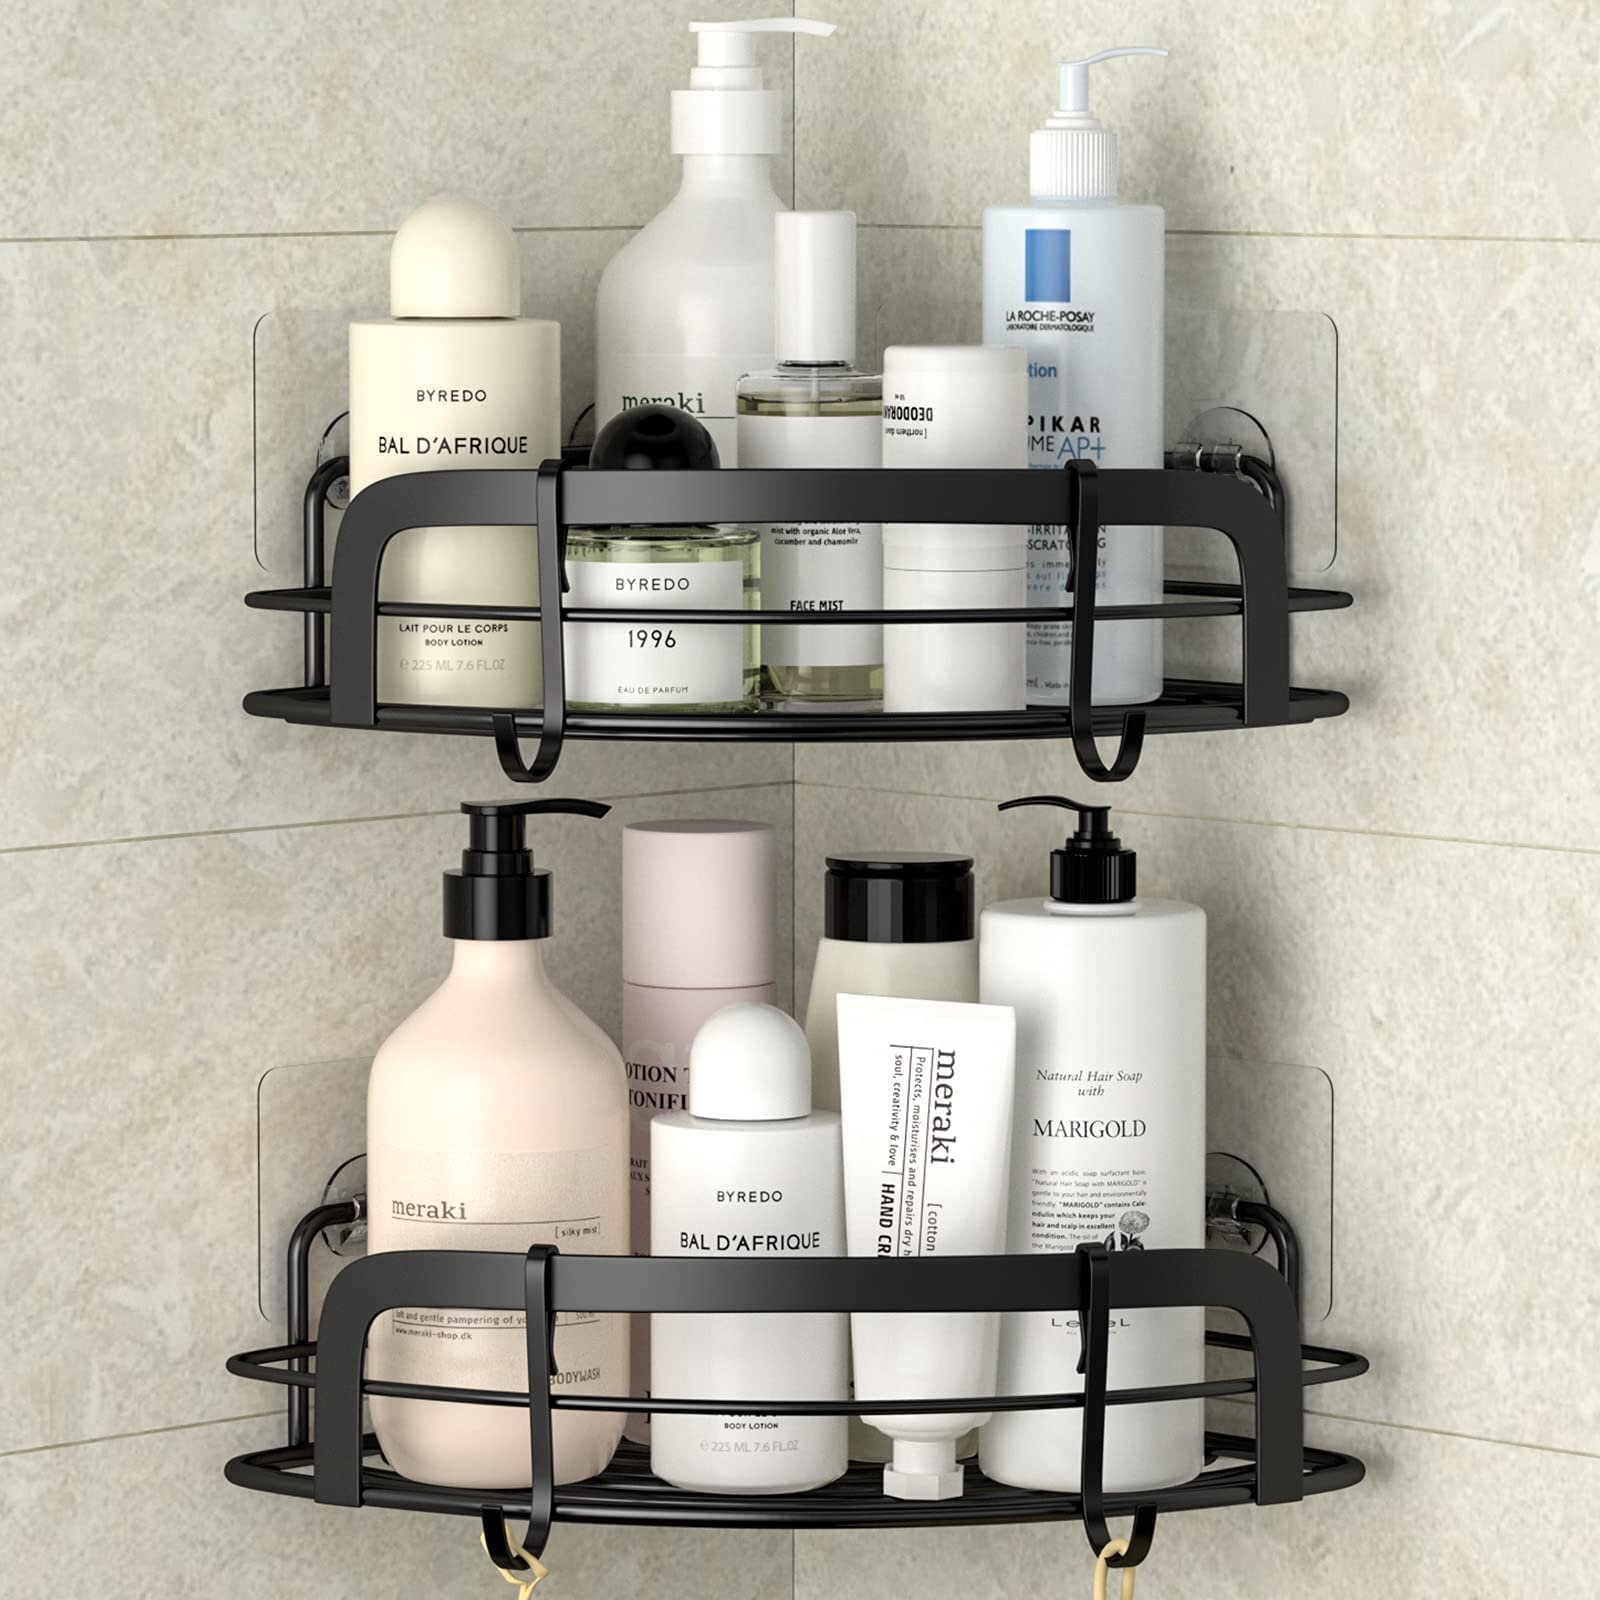 Rebrilliant Stainless Adhesive Shower Caddy with Hooks & Reviews